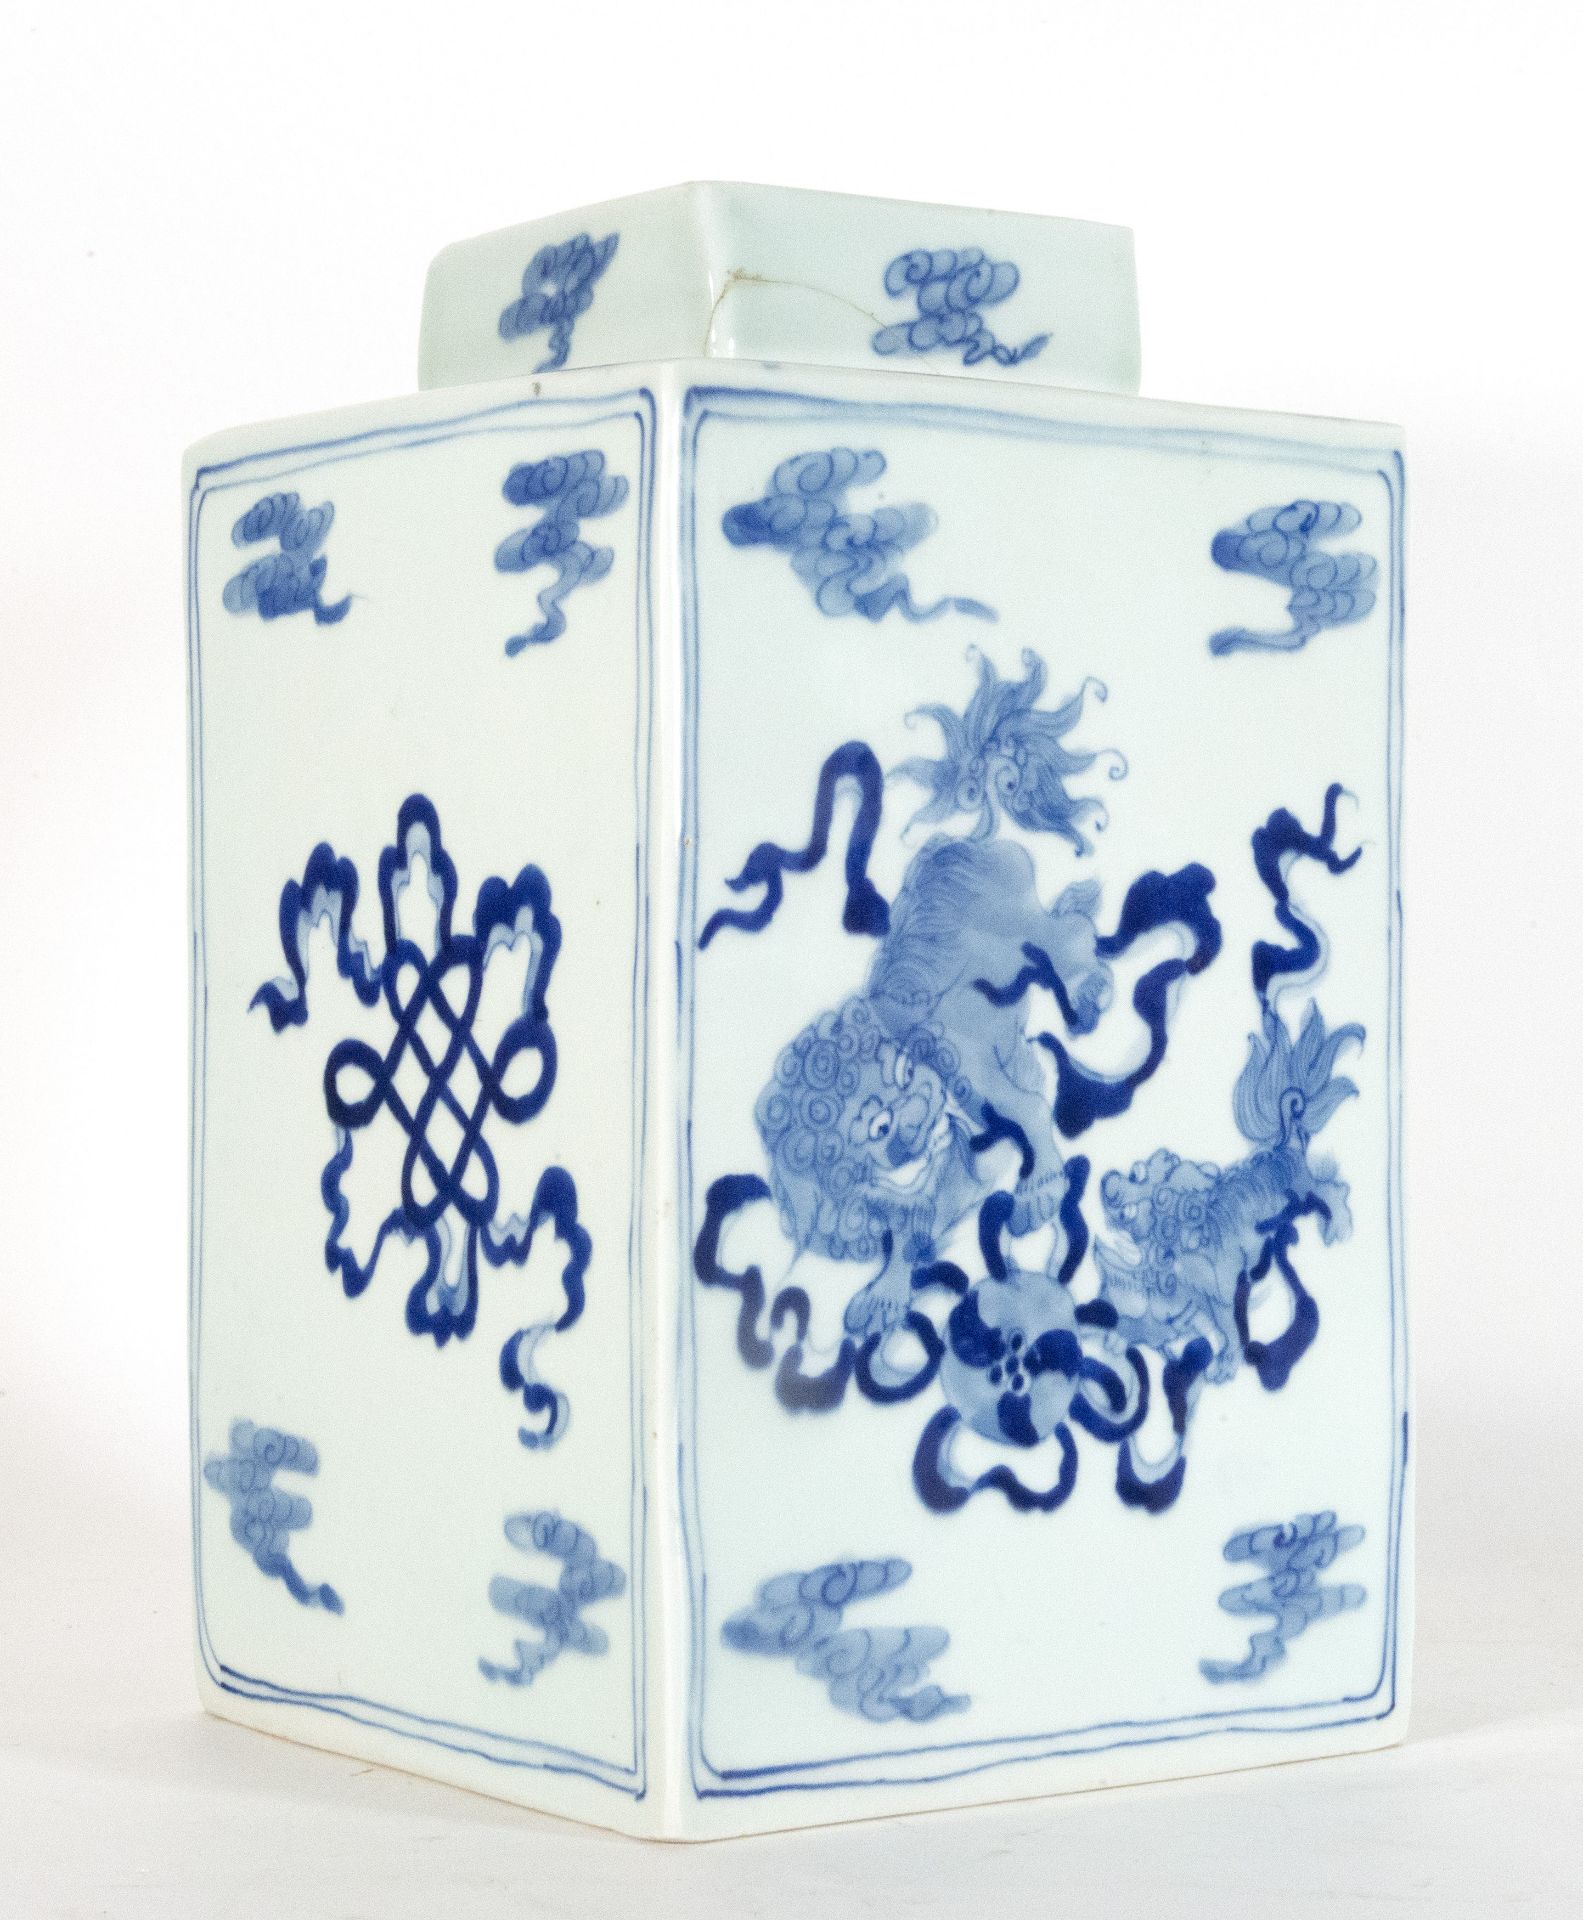 Chinese tibor in cobalt blue porcelain, late 19th century - Image 3 of 5